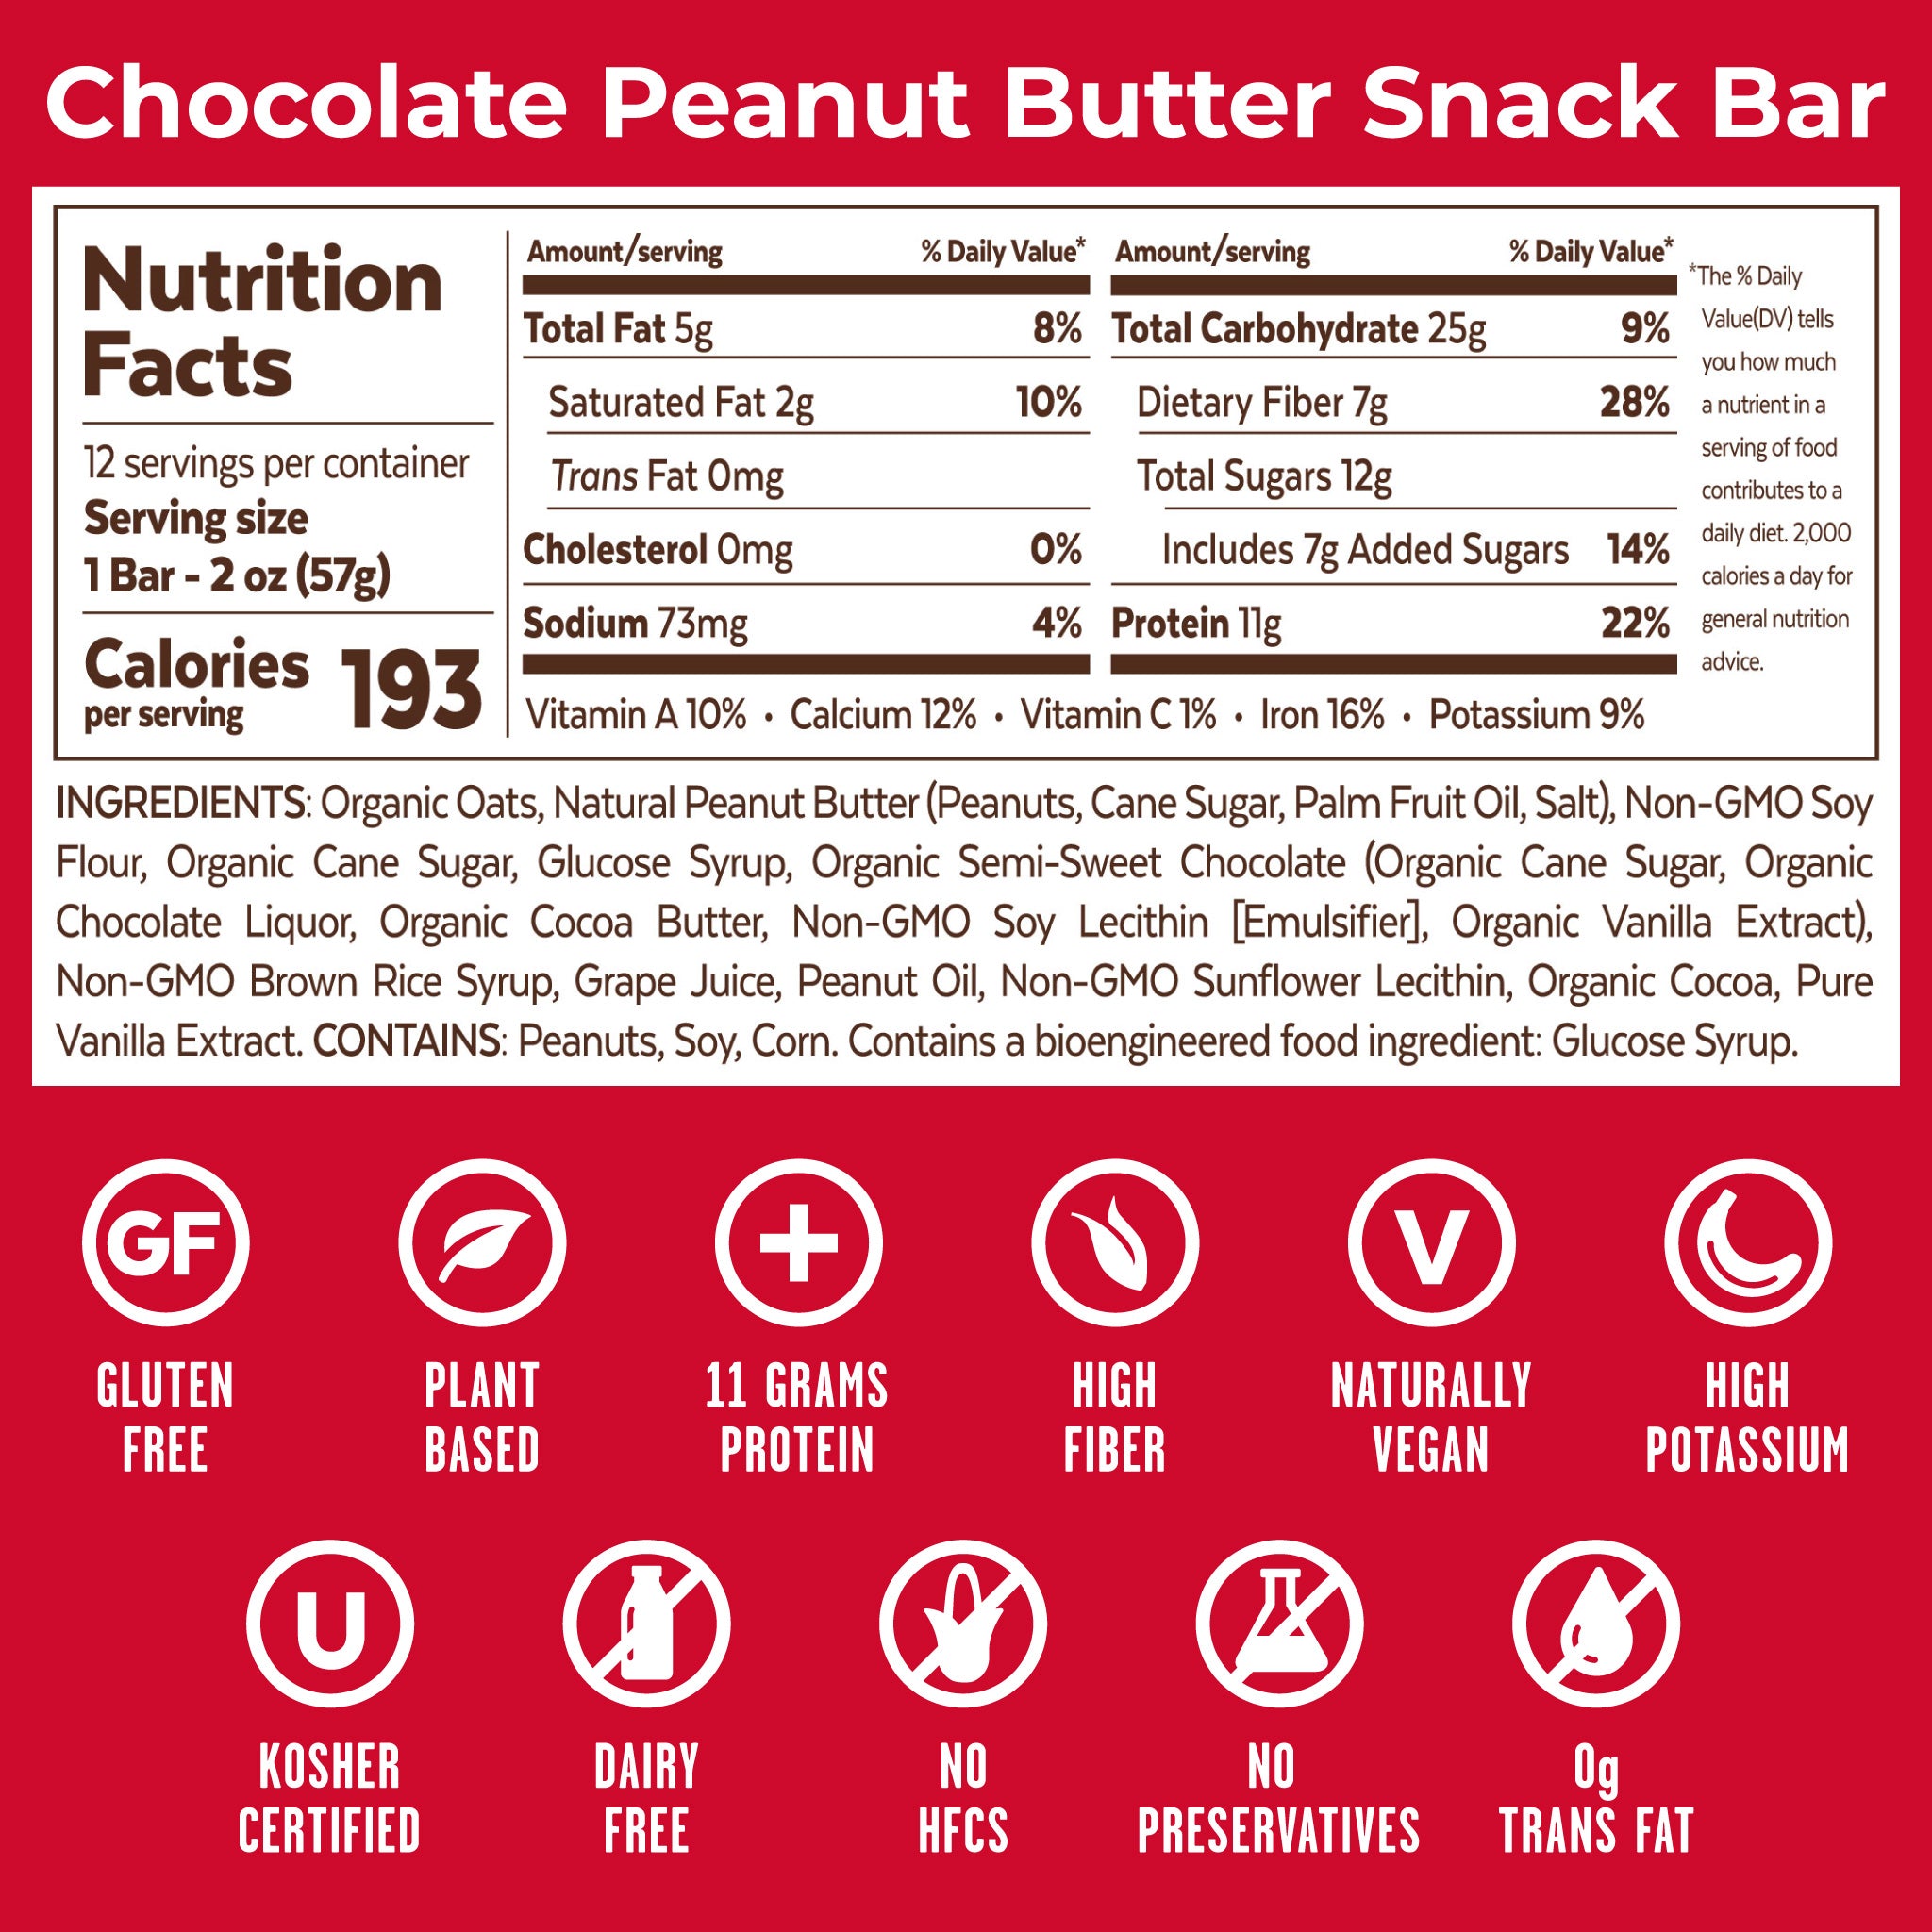 12 Snack Bars - Chocolate Peanut Butter